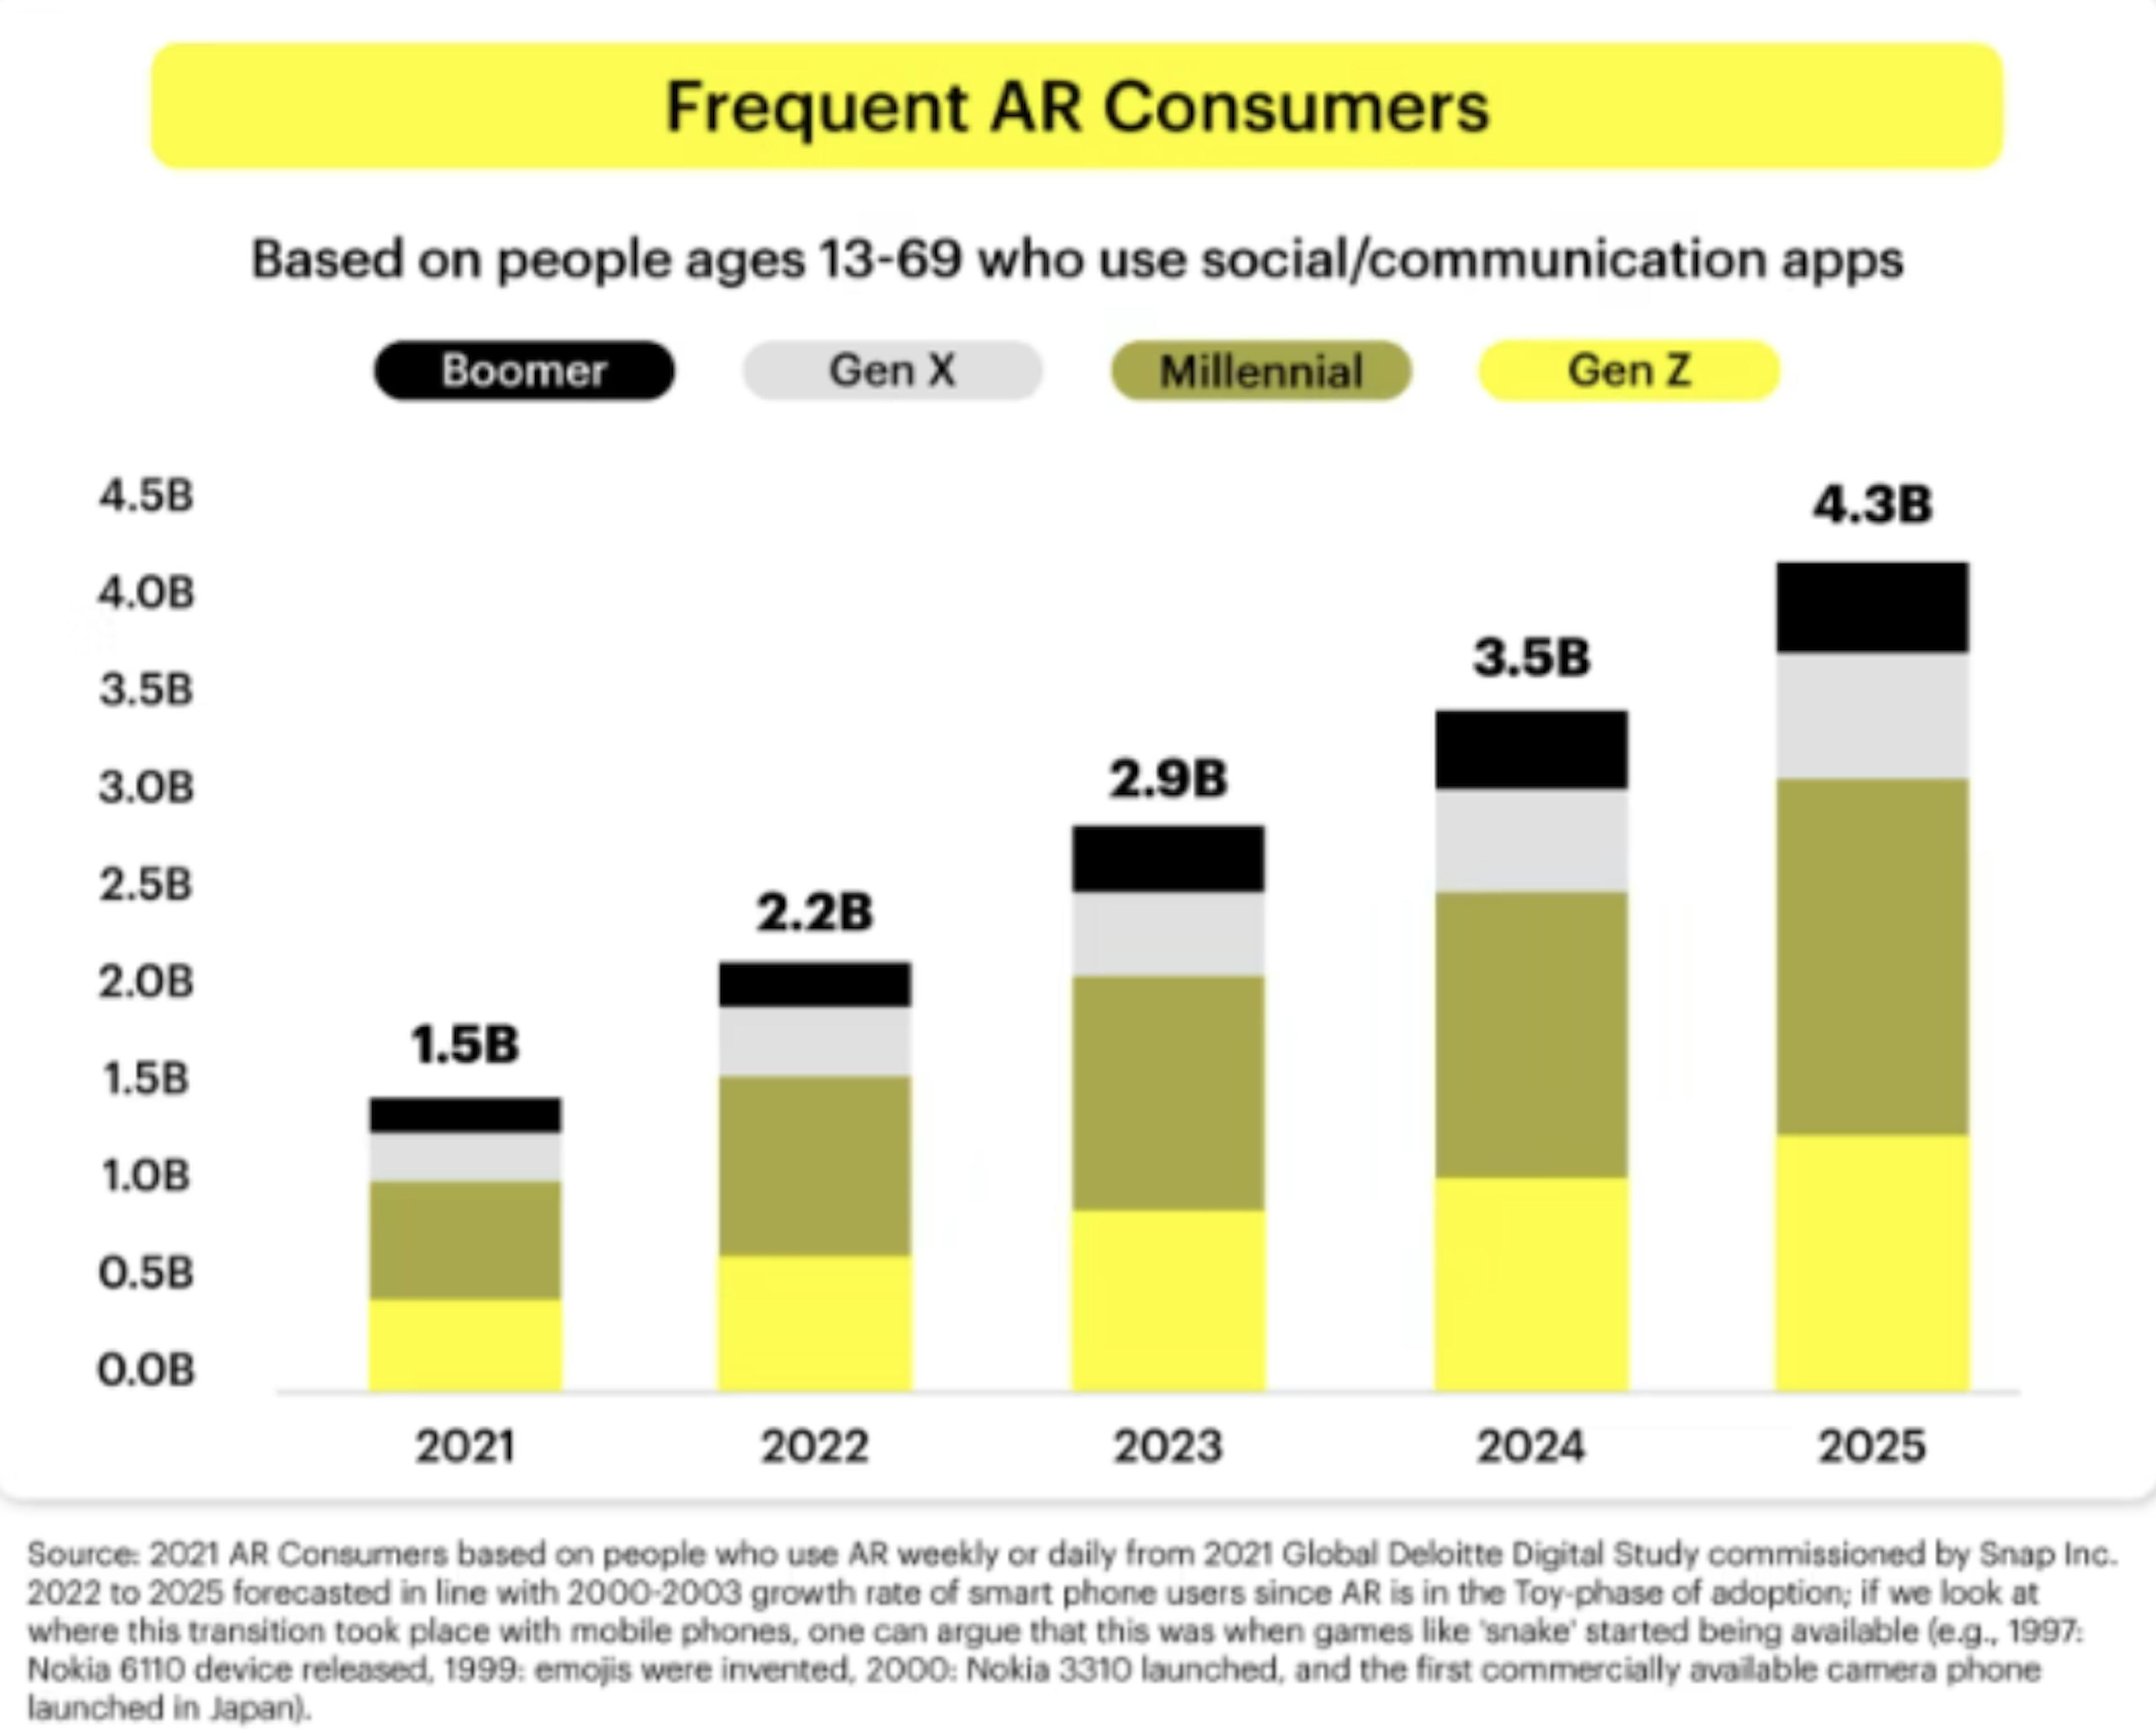 Frequent AR Consumers